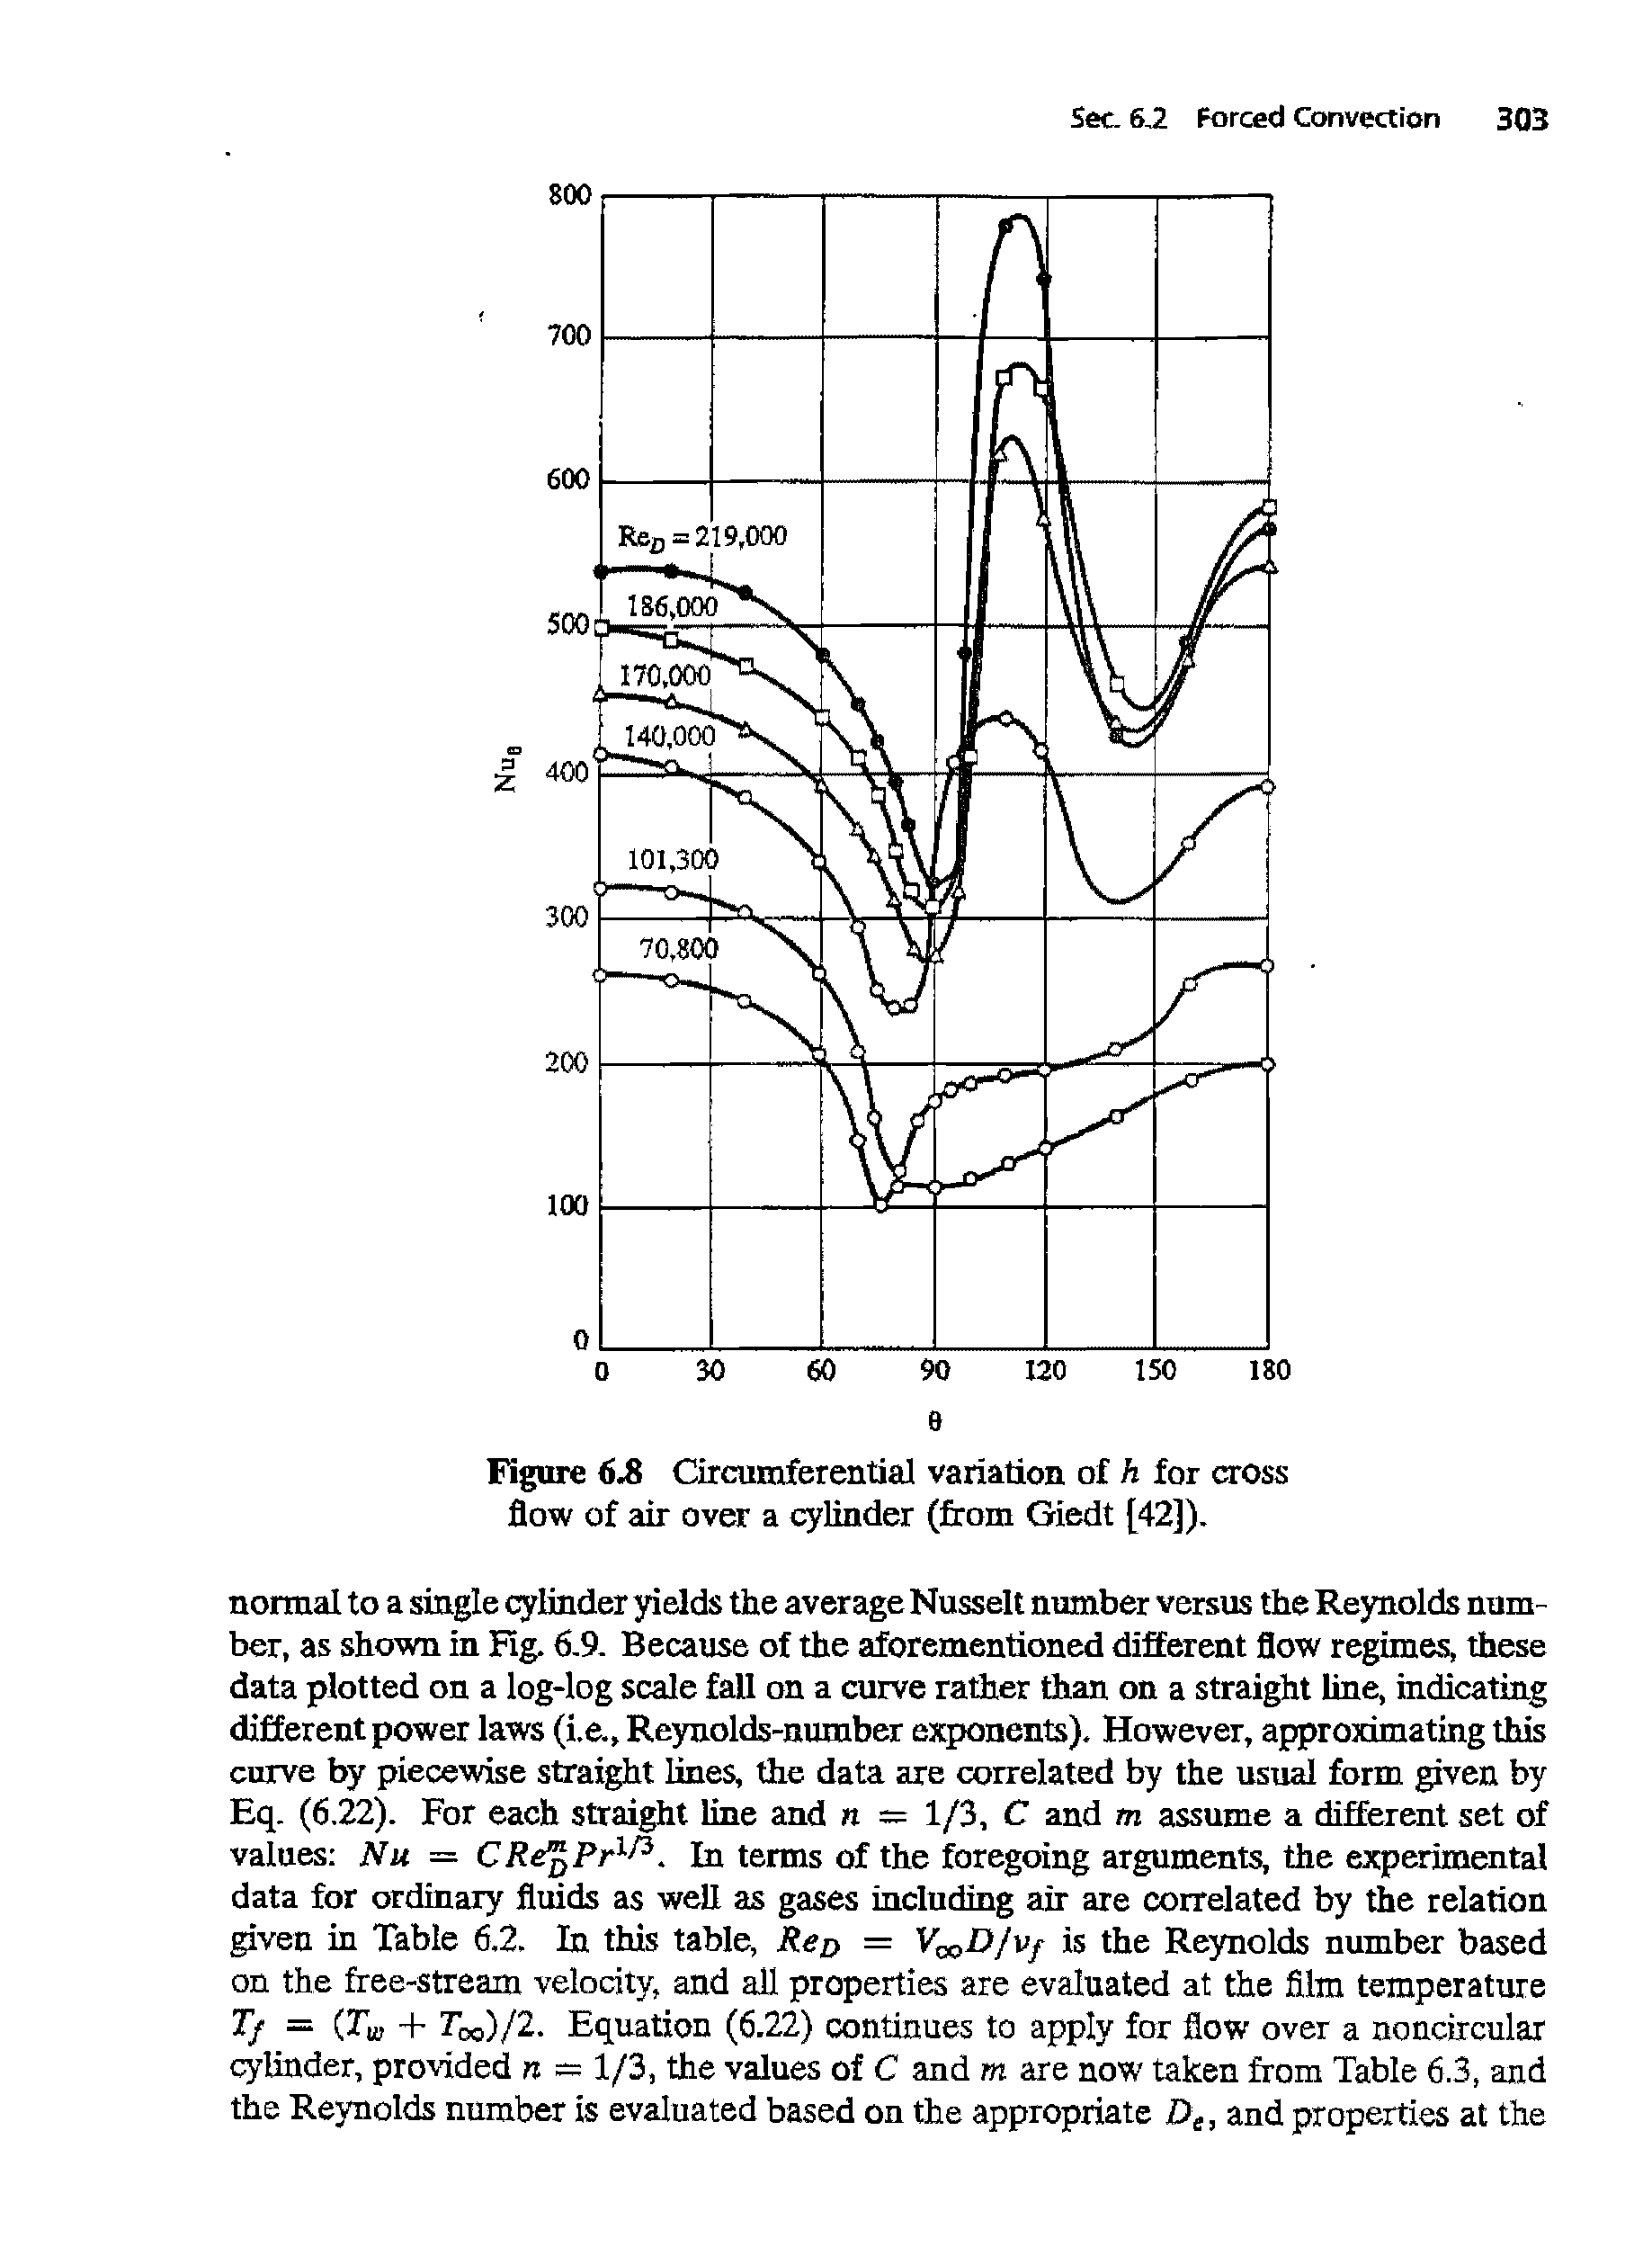 Figure 6.8 Circumferential variation of h for cross flow of air over a cylinder (from Giedt [42]).